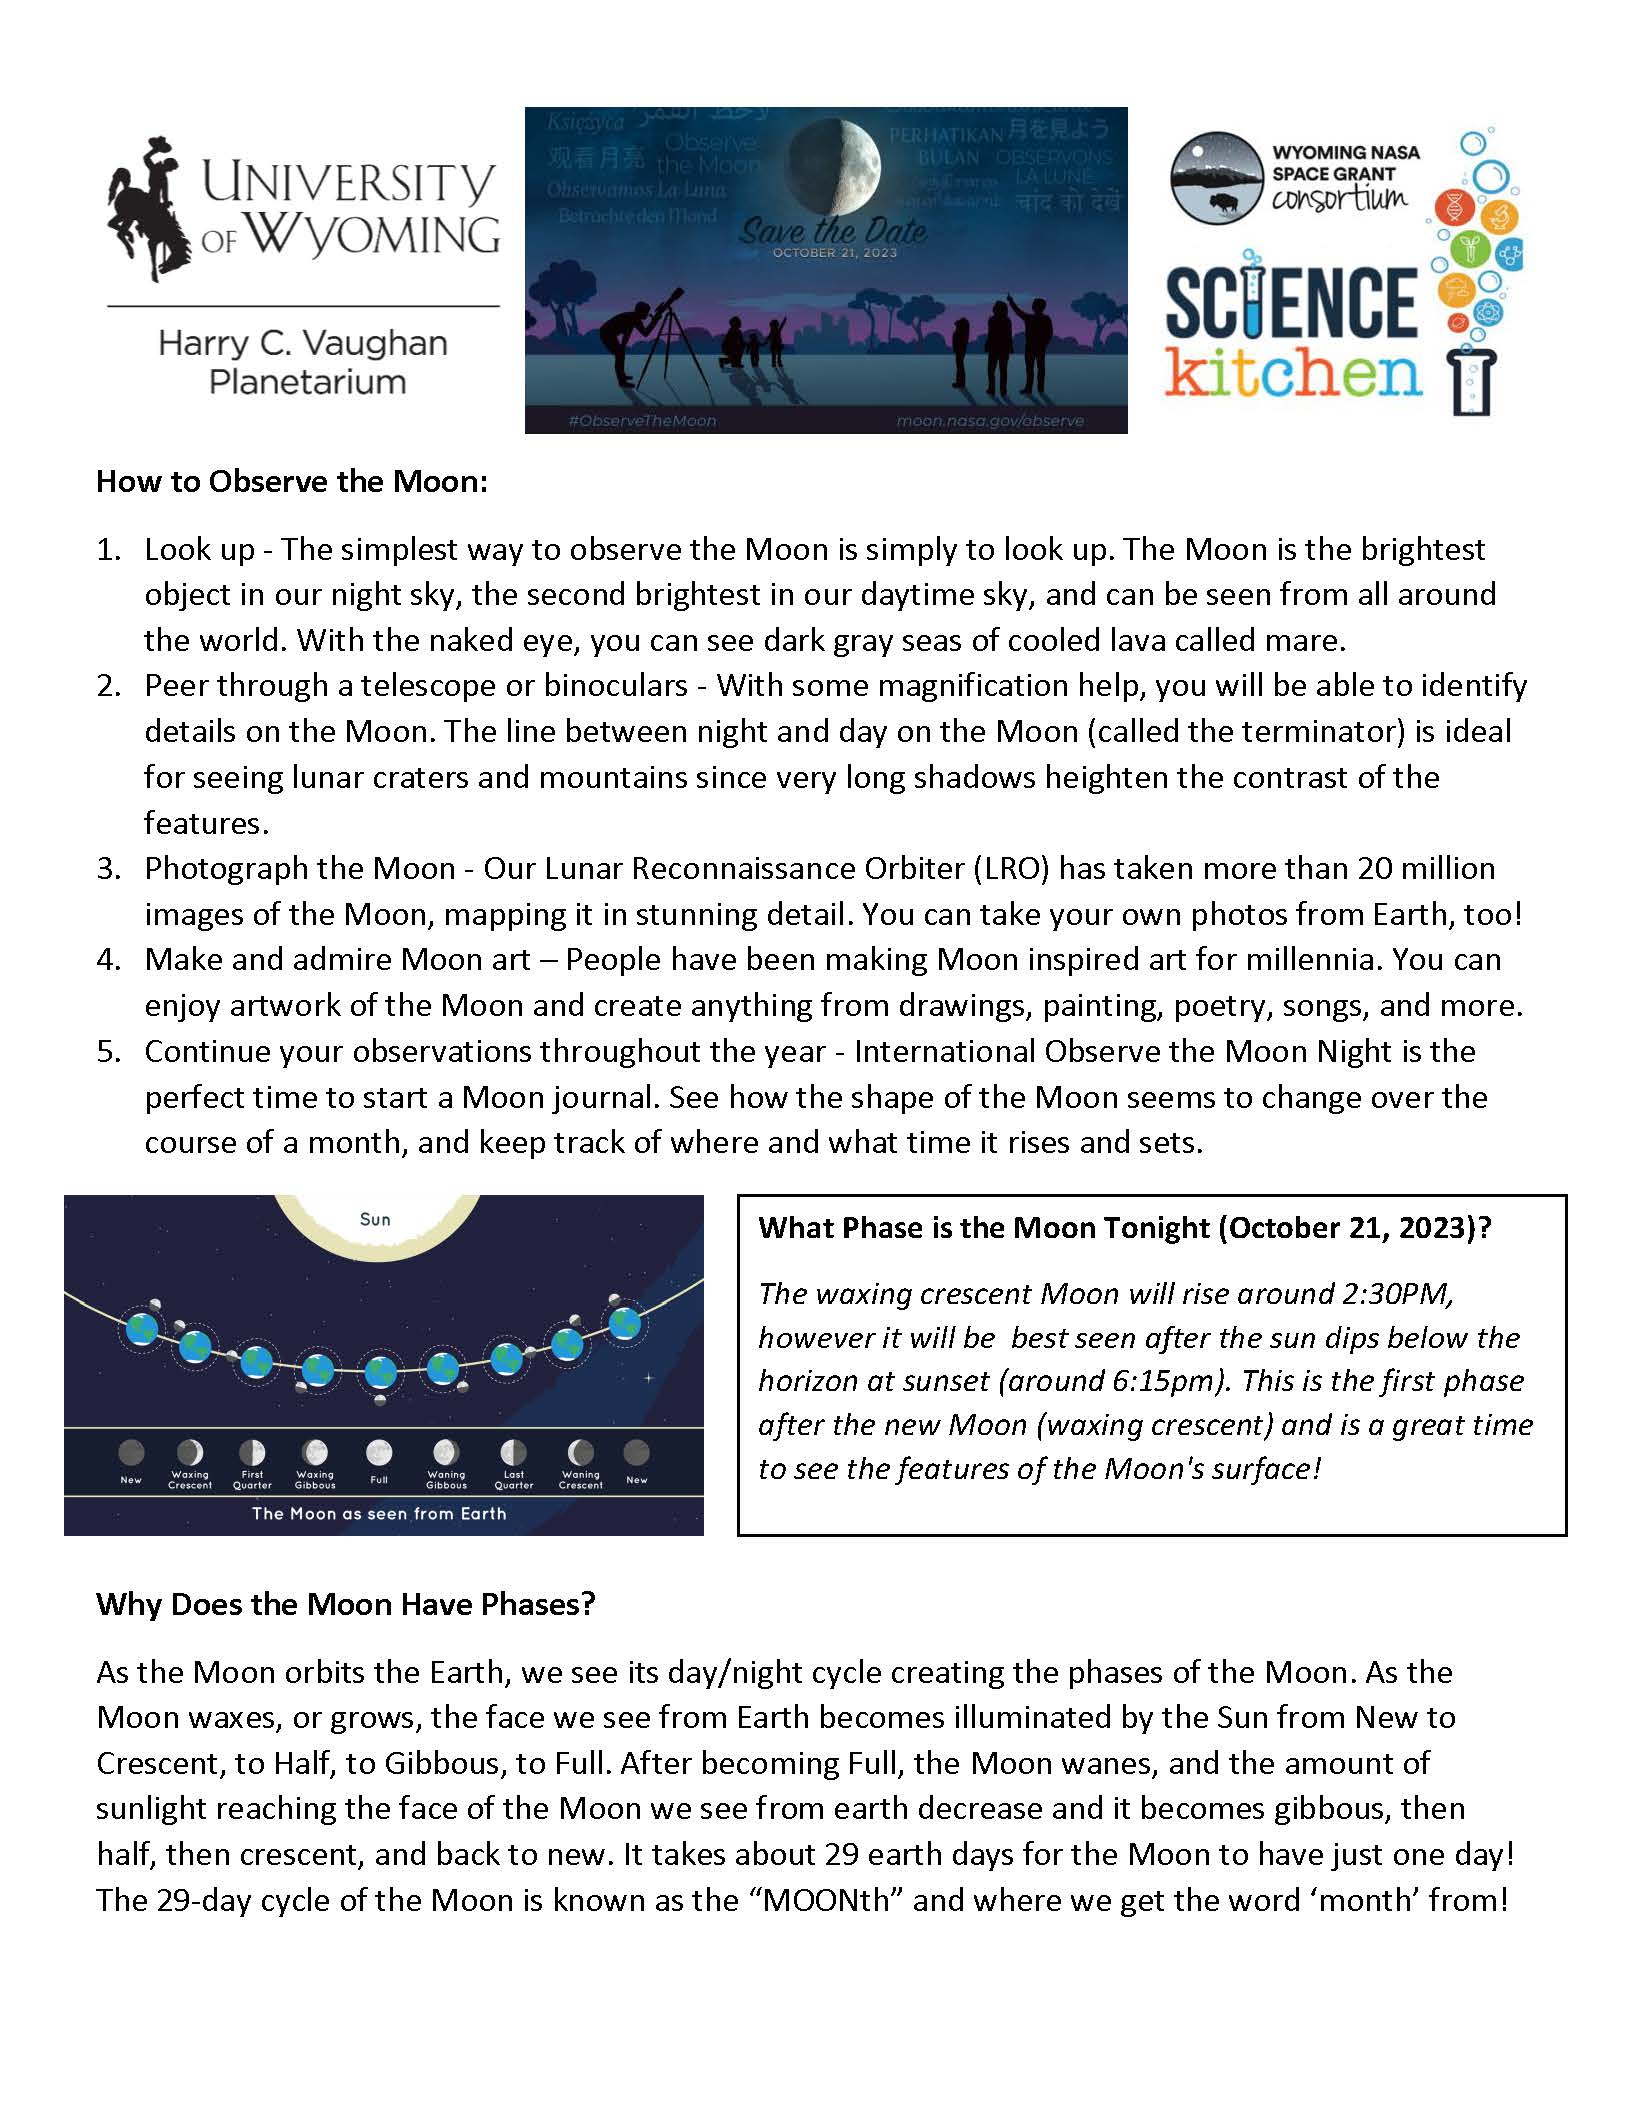 10-21 How To Observe the Moon_Page_1